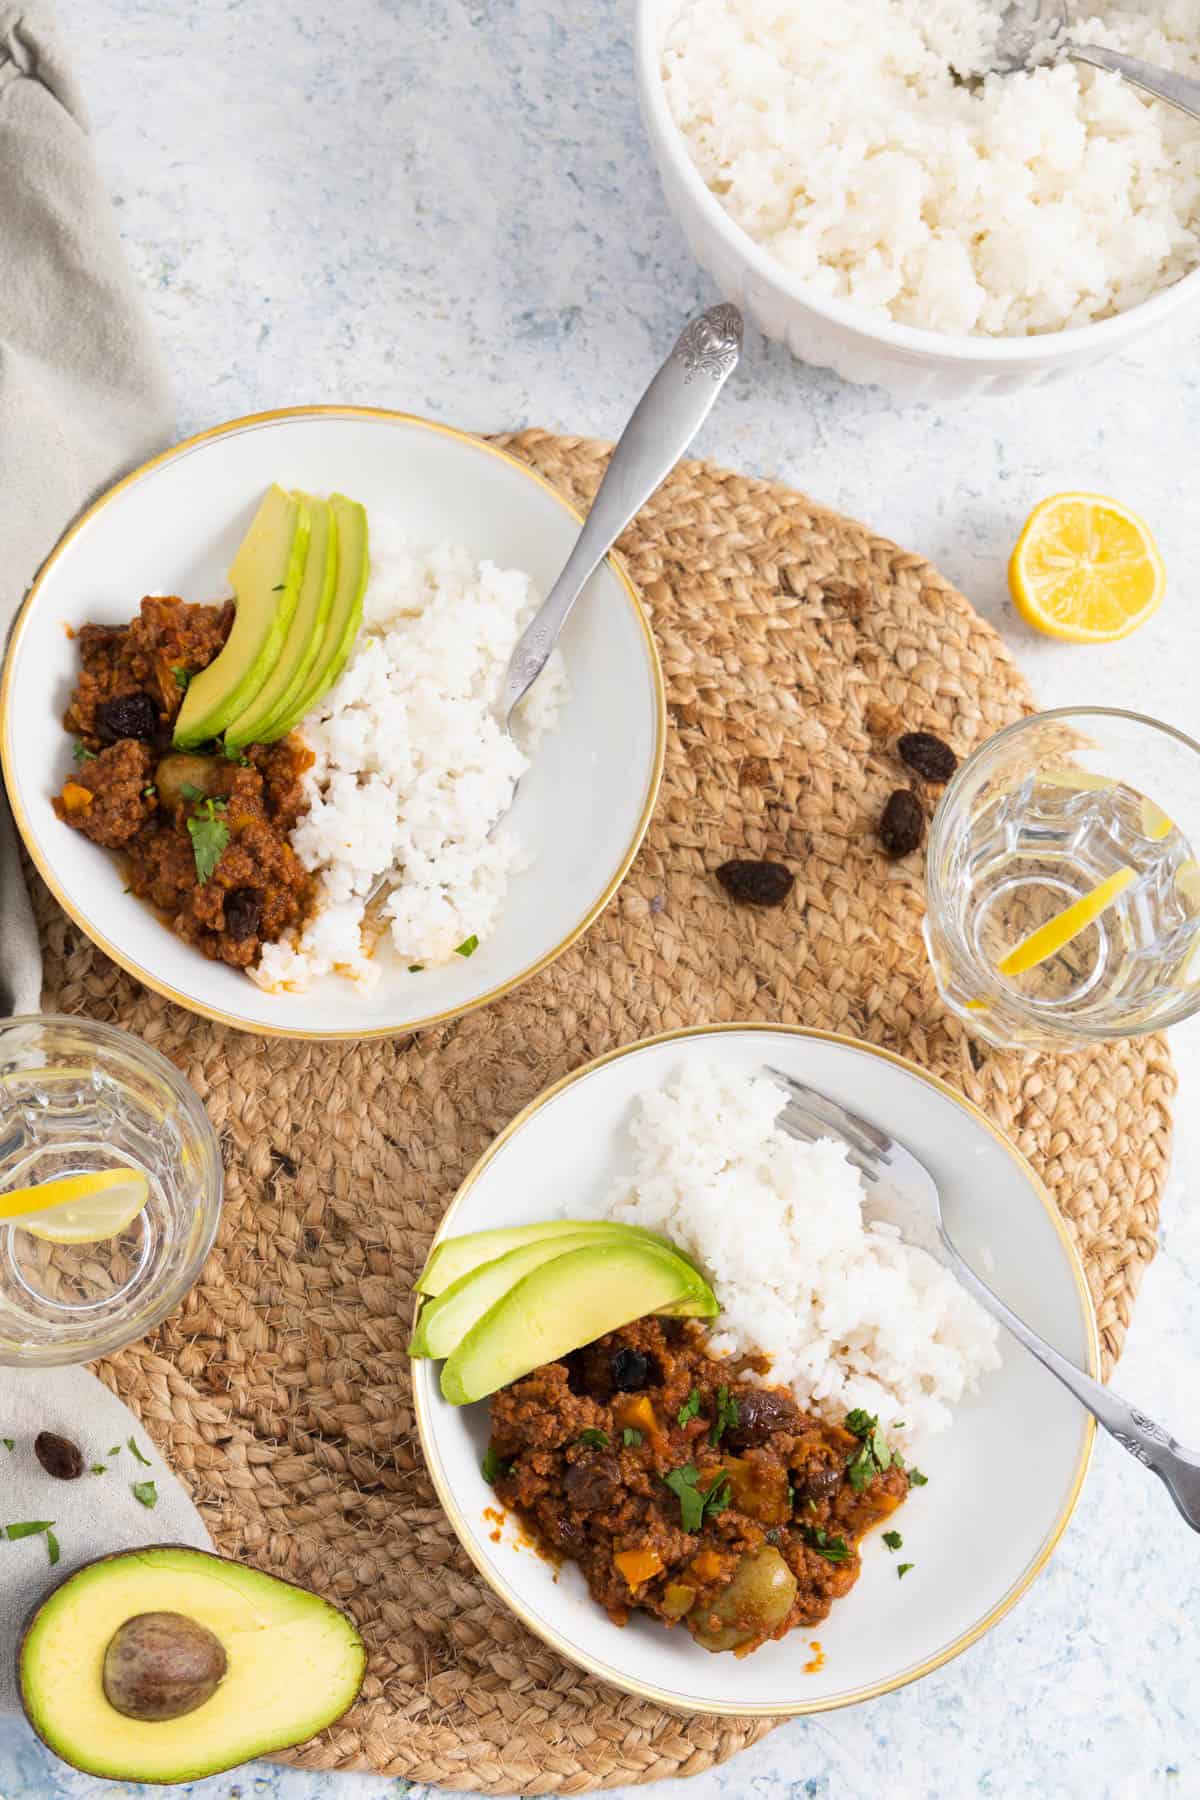 Ground beef served in white plate wit some white rice and 3 slices of avocados, there are 2 glasses of water with slices of lemon.